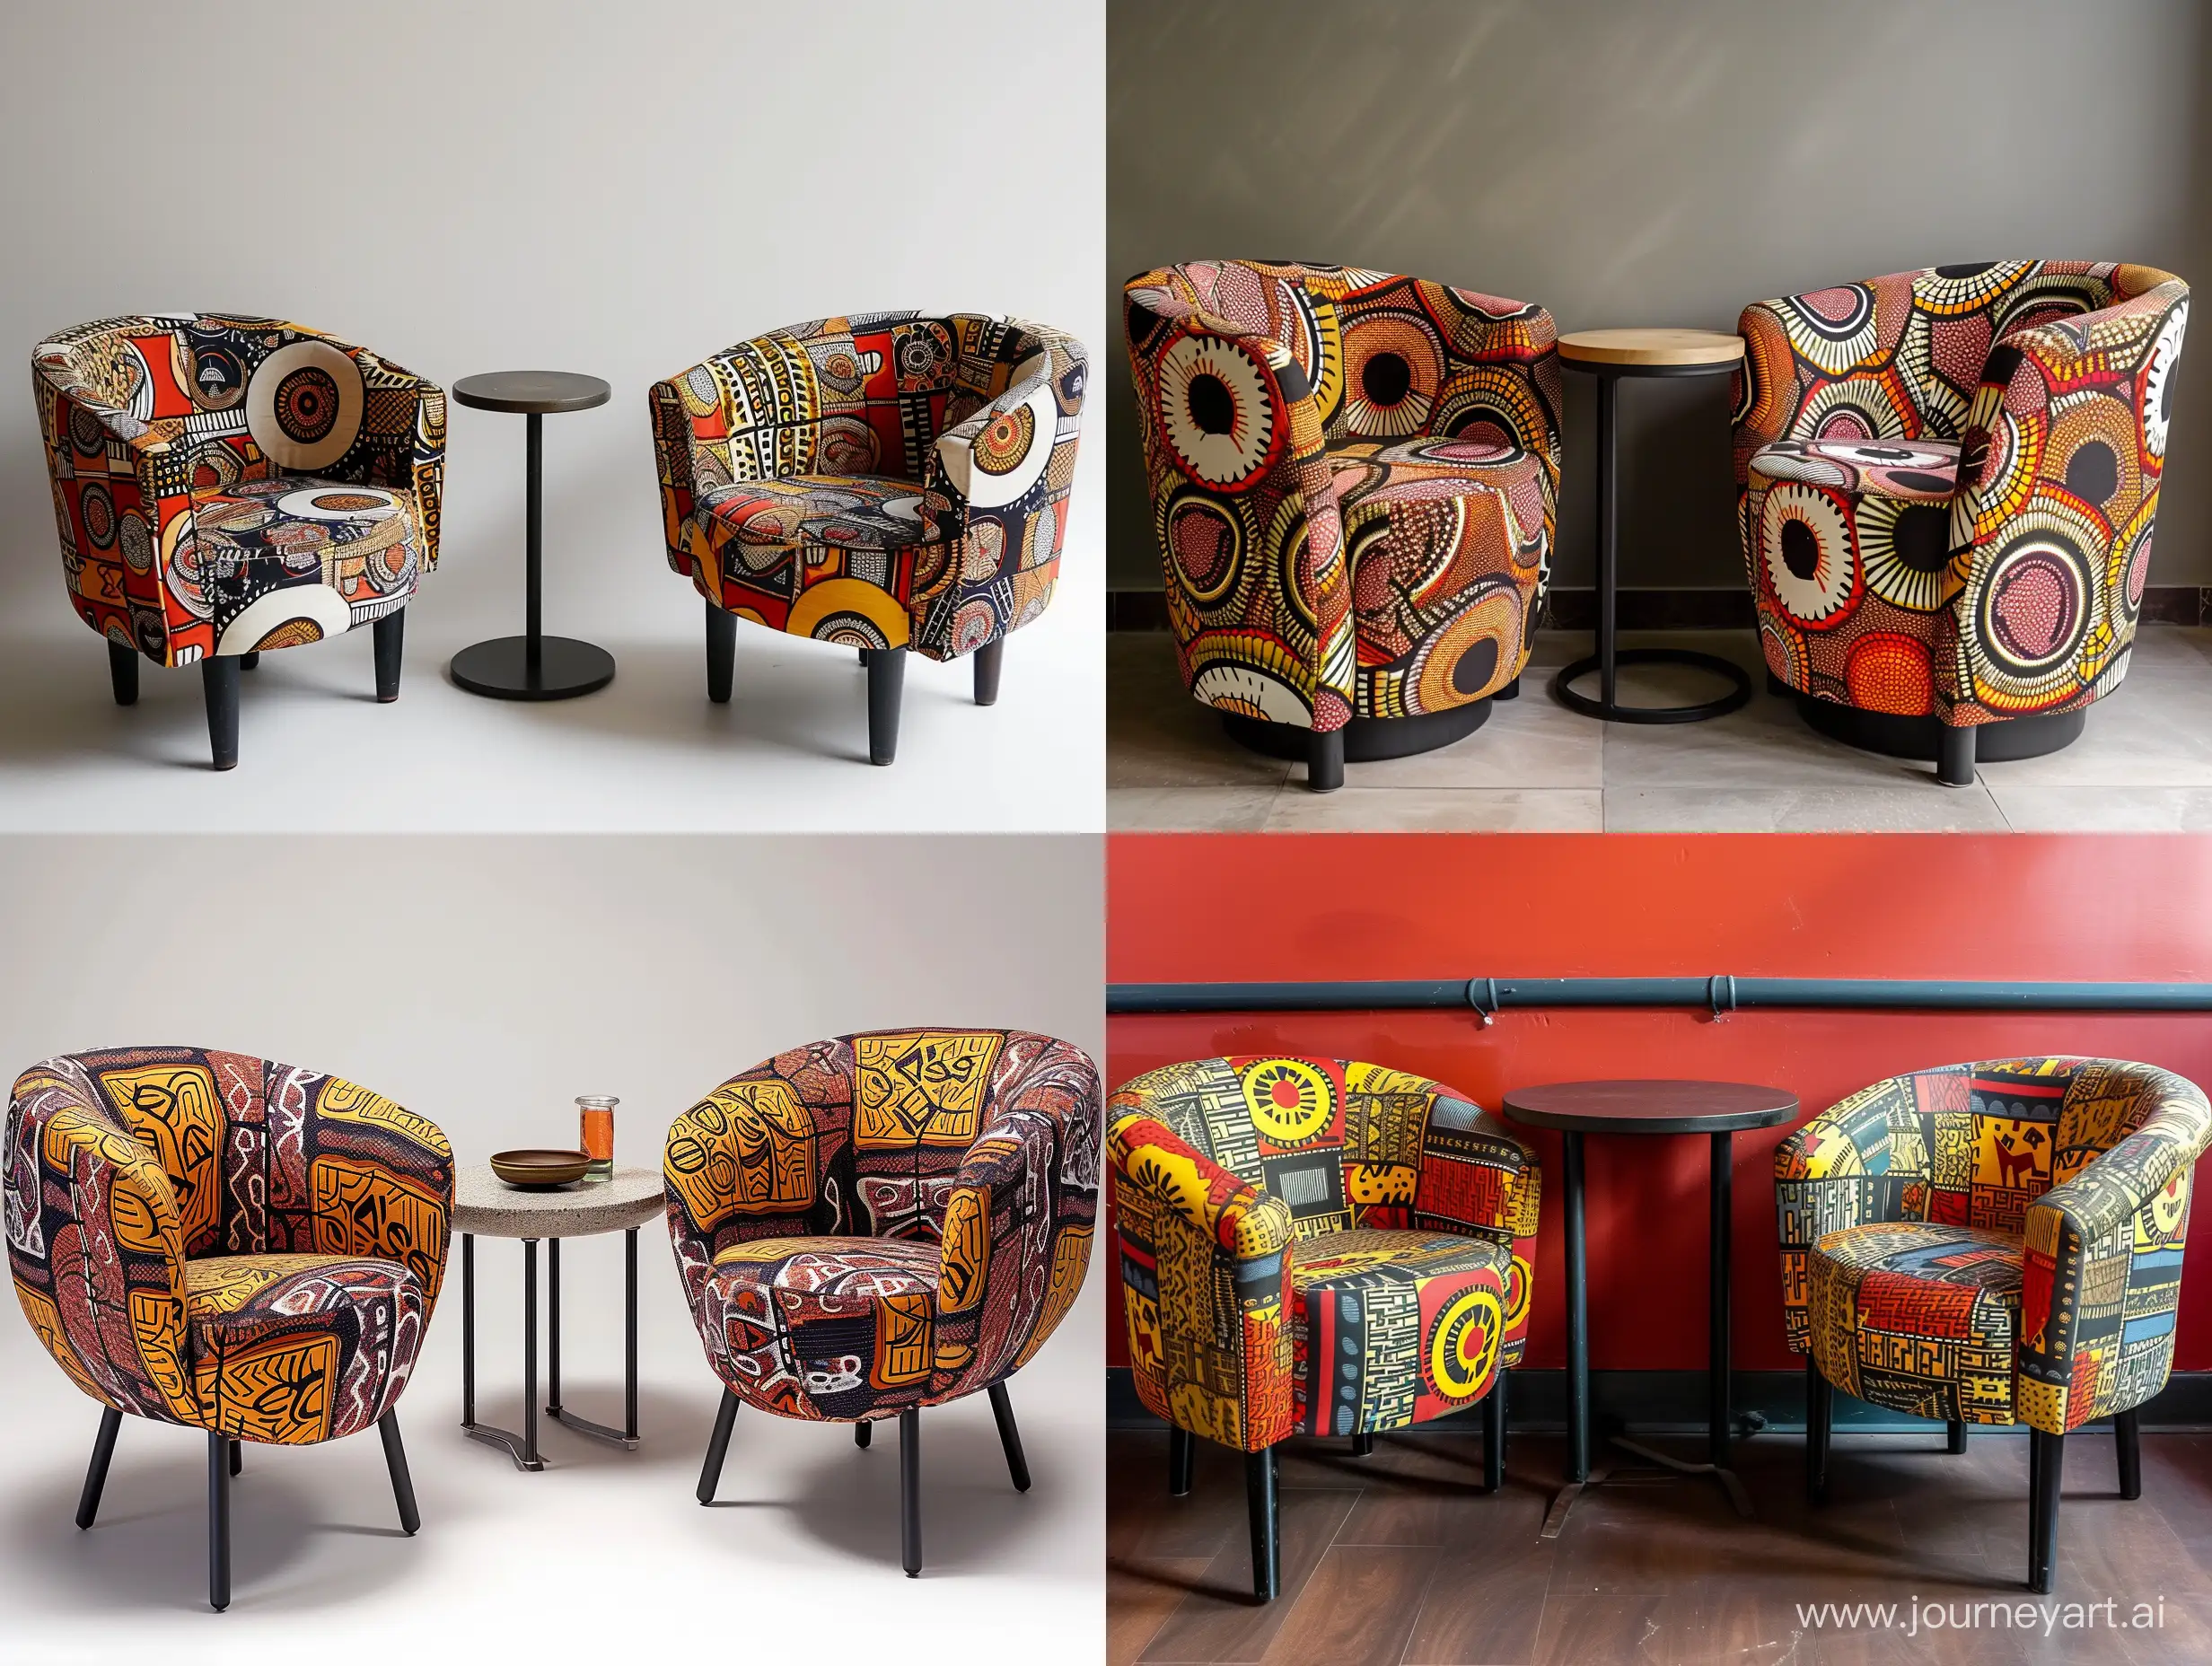 two african patterned chairs sitting next to a small table, in the style of futurism influence, use of fabric, pop-culture-infused, functionality emphasis